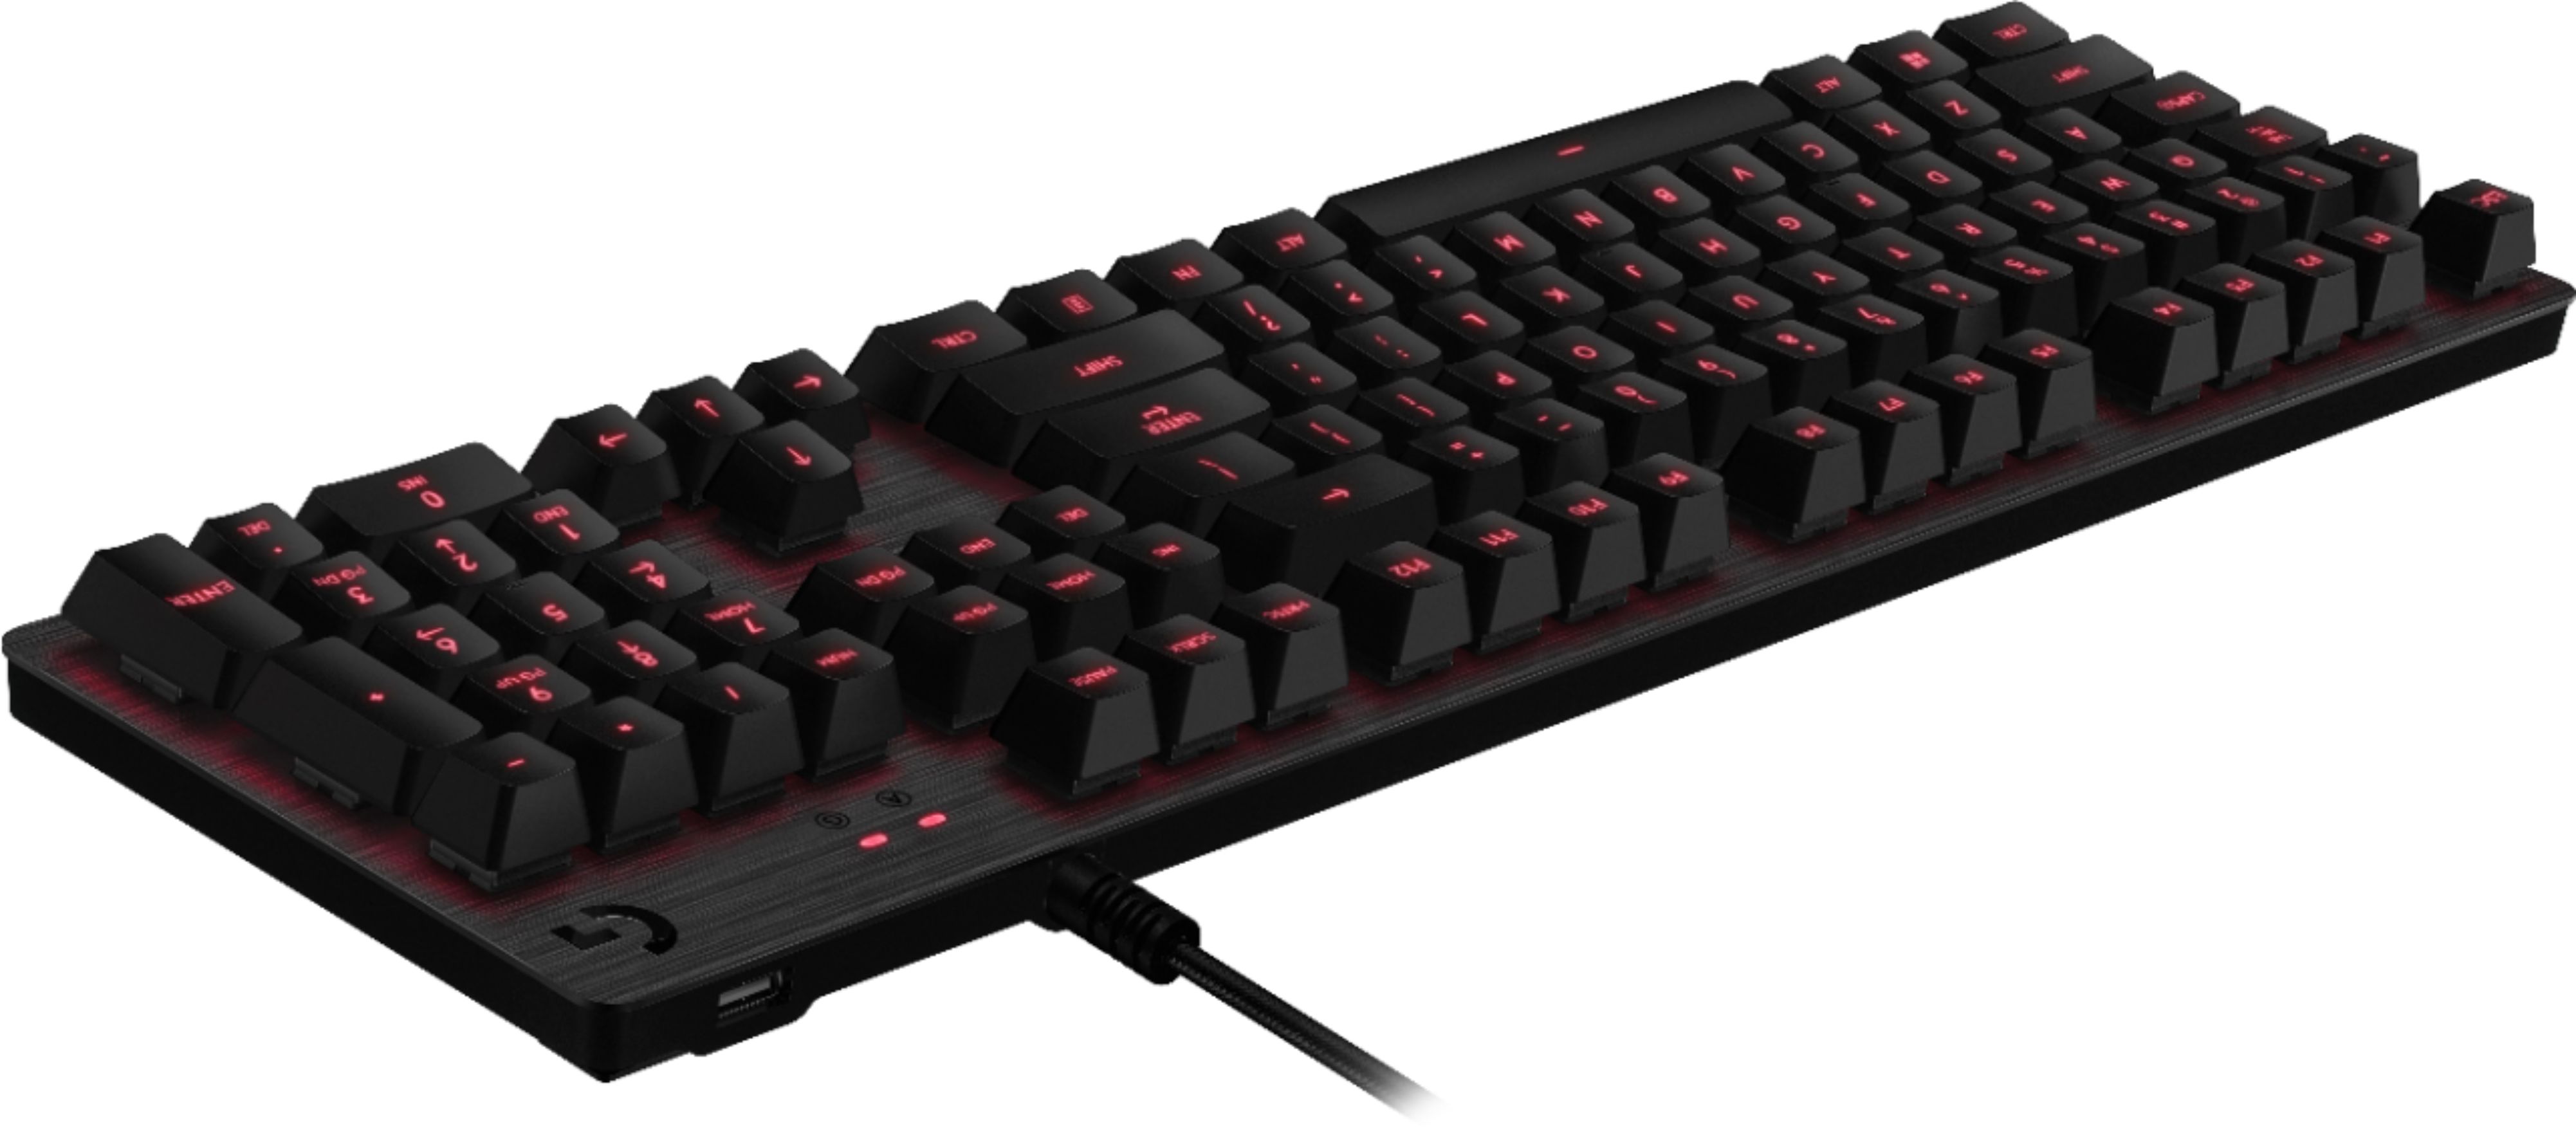 Logitech G413 Wired Gaming Mechanical Romer-G Switch Keyboard with Carbon 920-008300 Best Buy